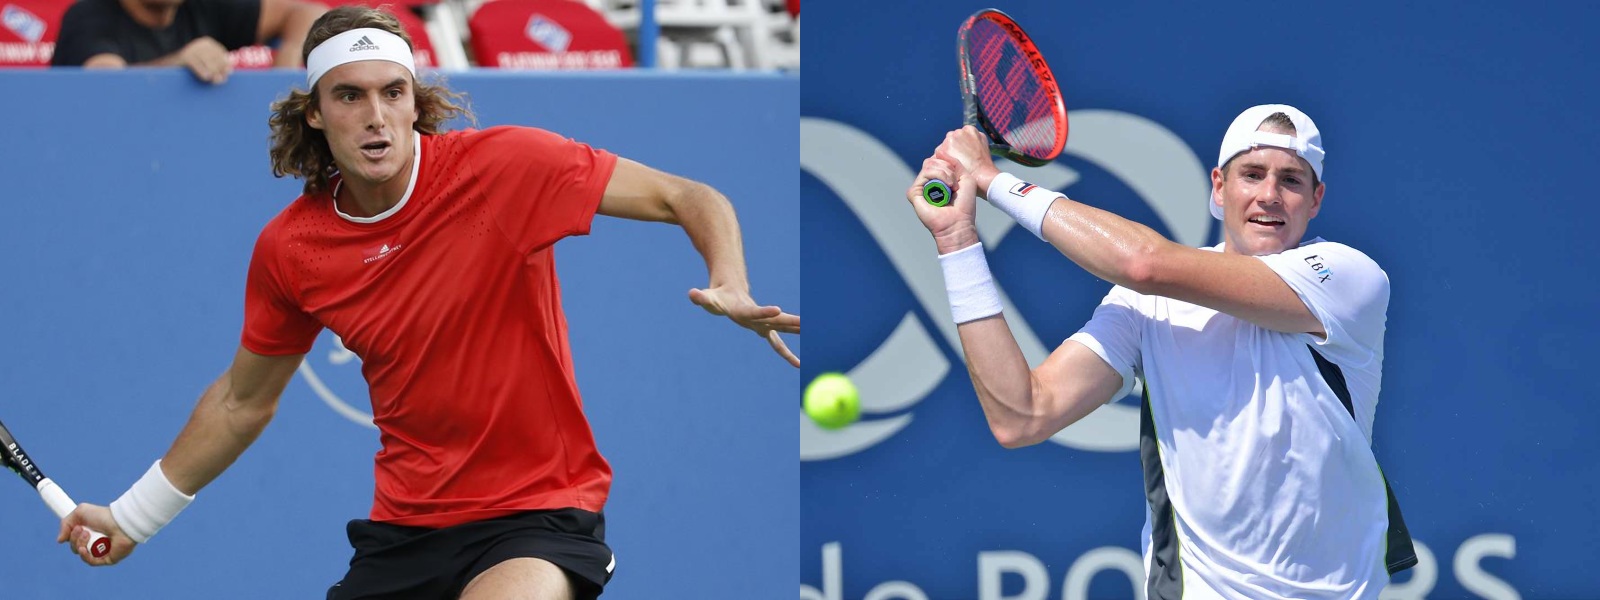 Tsitsipas and Isner crash out in Montreal